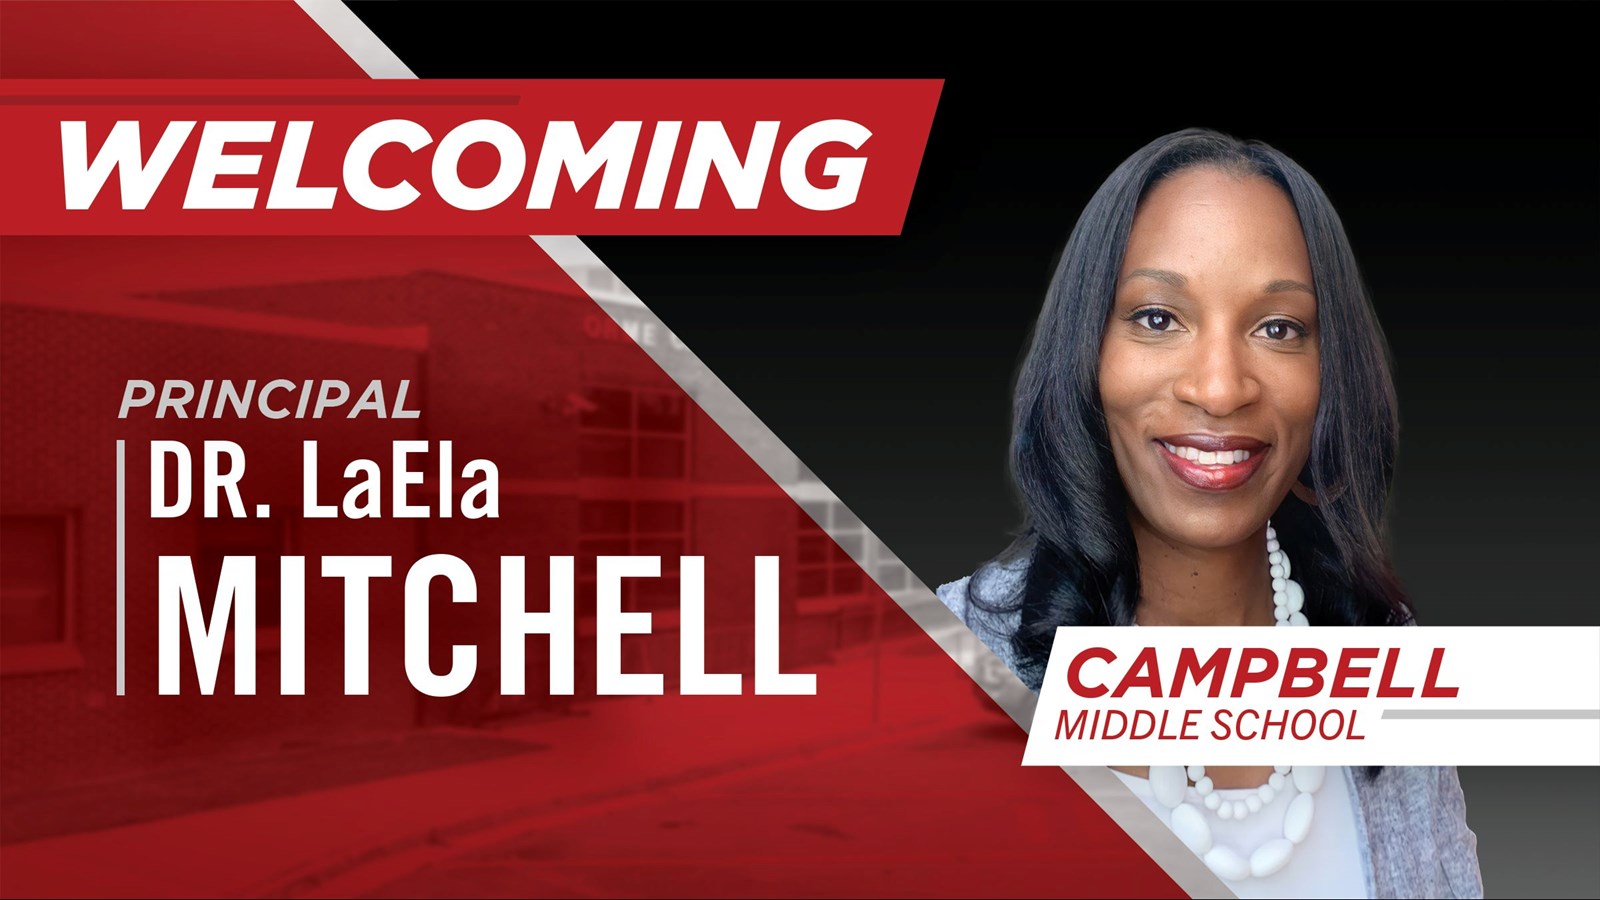 Dr. LaEla is the new principal of Campbell Middle School.